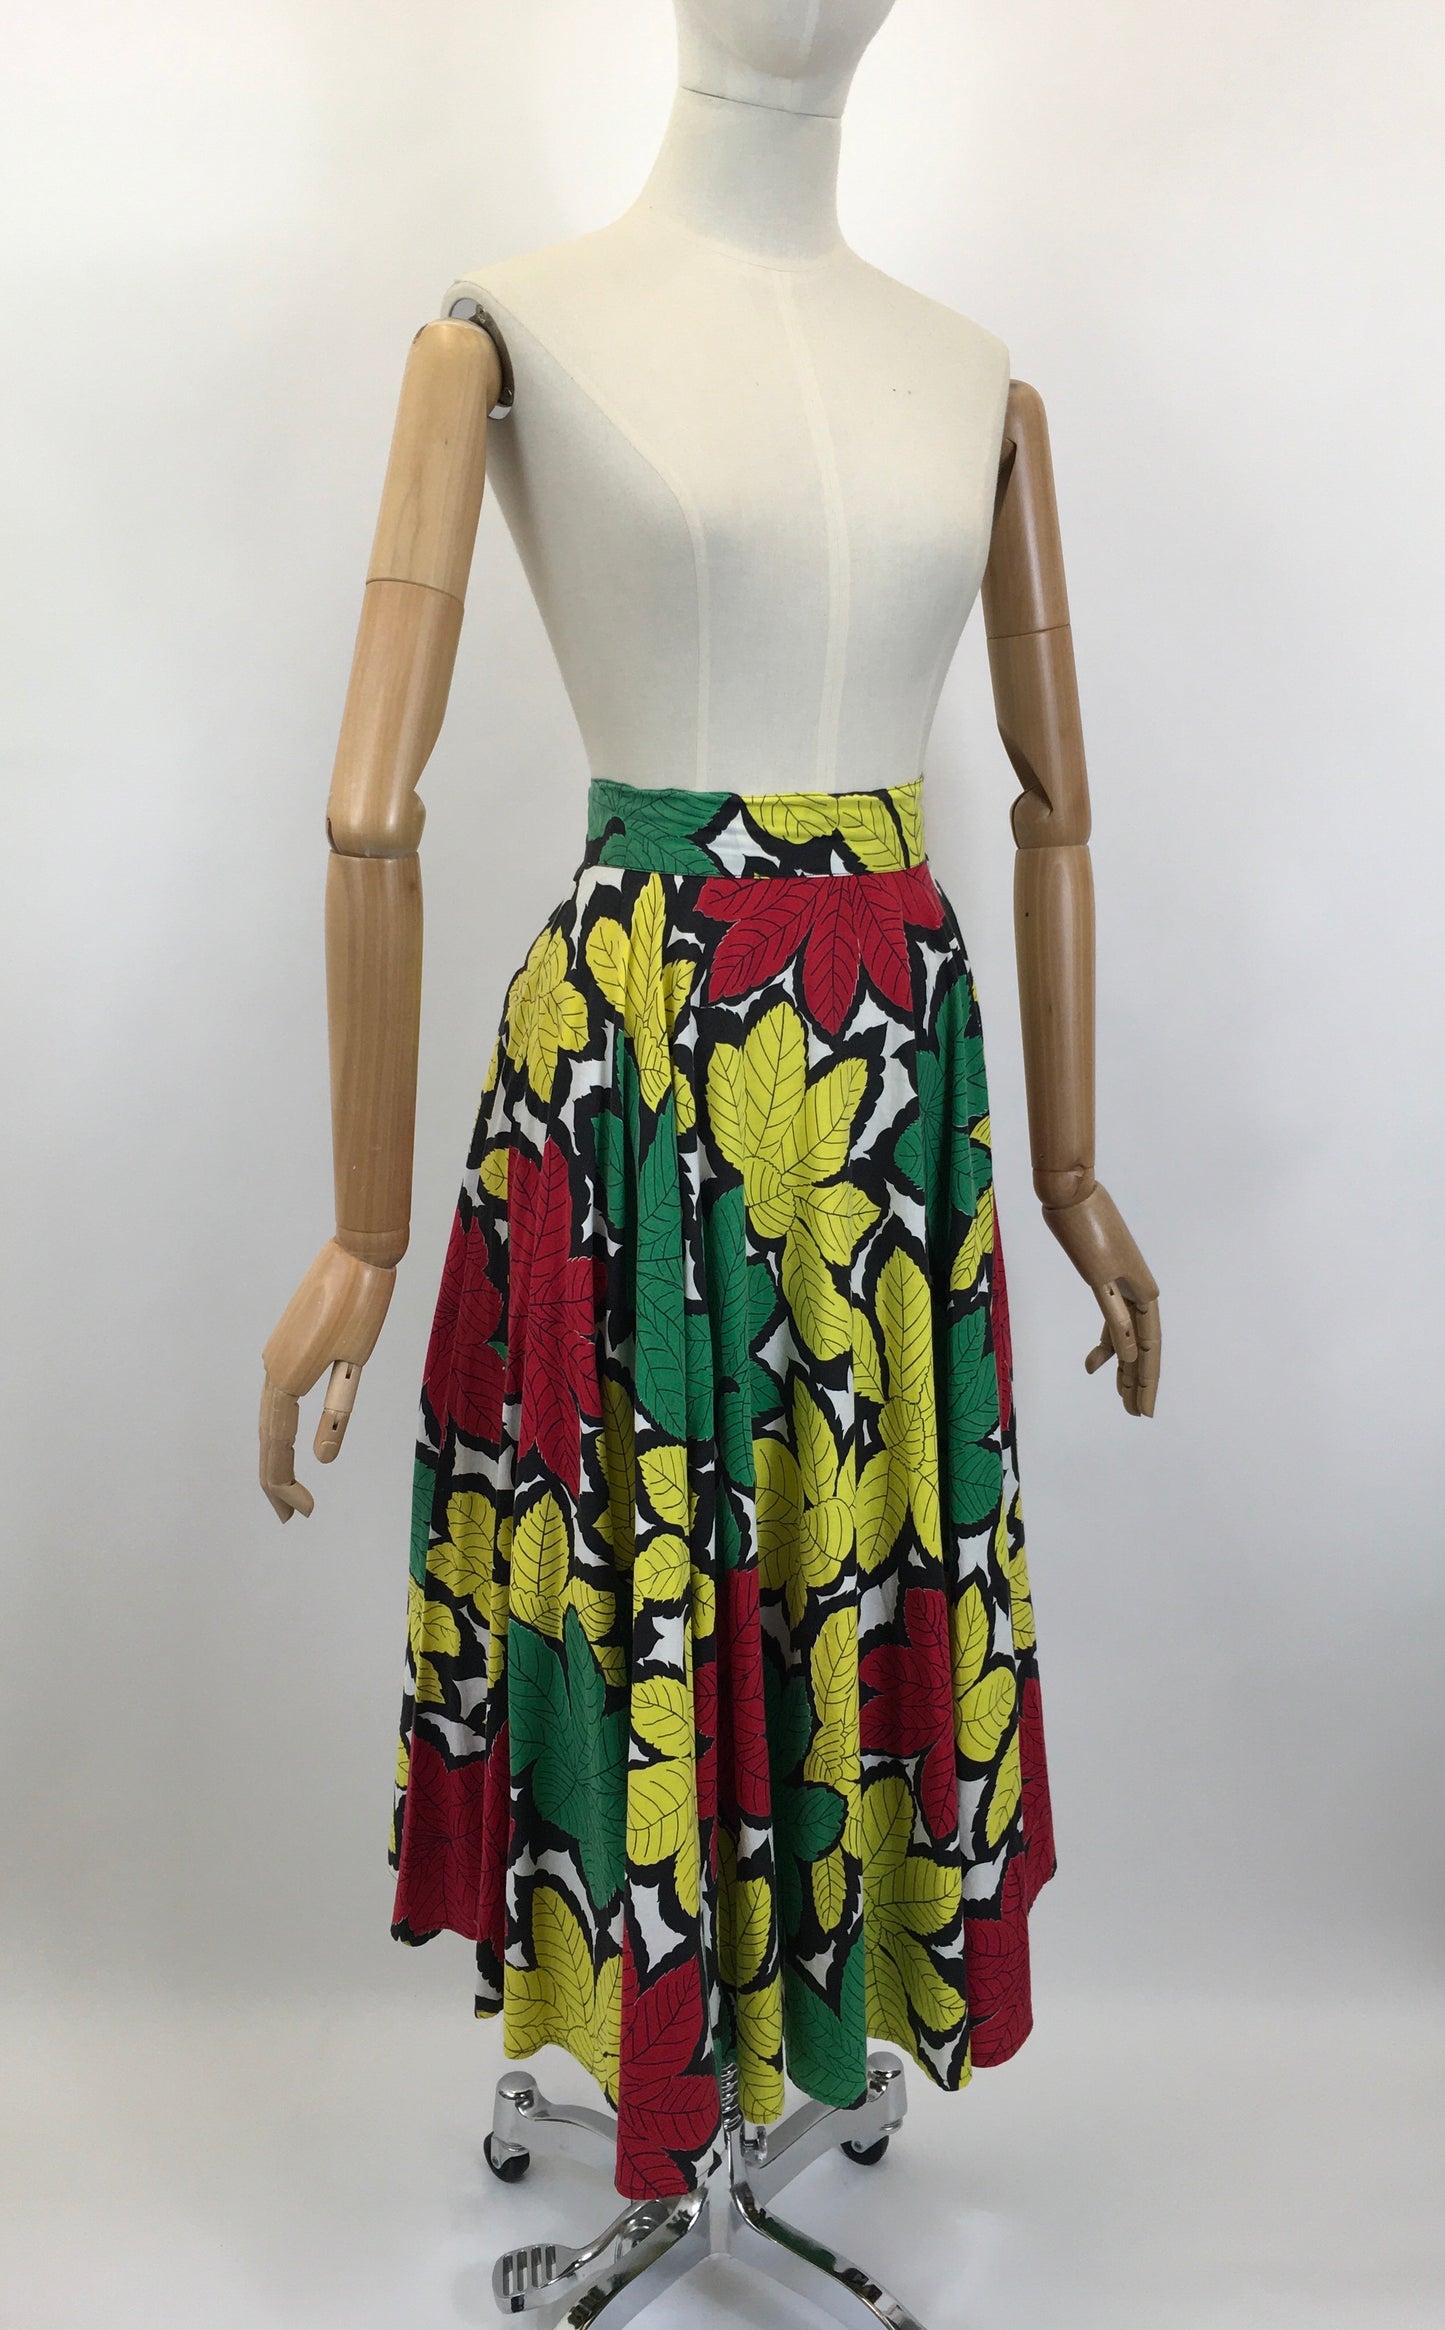 Original 1940's Sensational Cotton Summer Skirt - In a Black Edged Leaf Motif With Bright Red, Green, White & Yellow